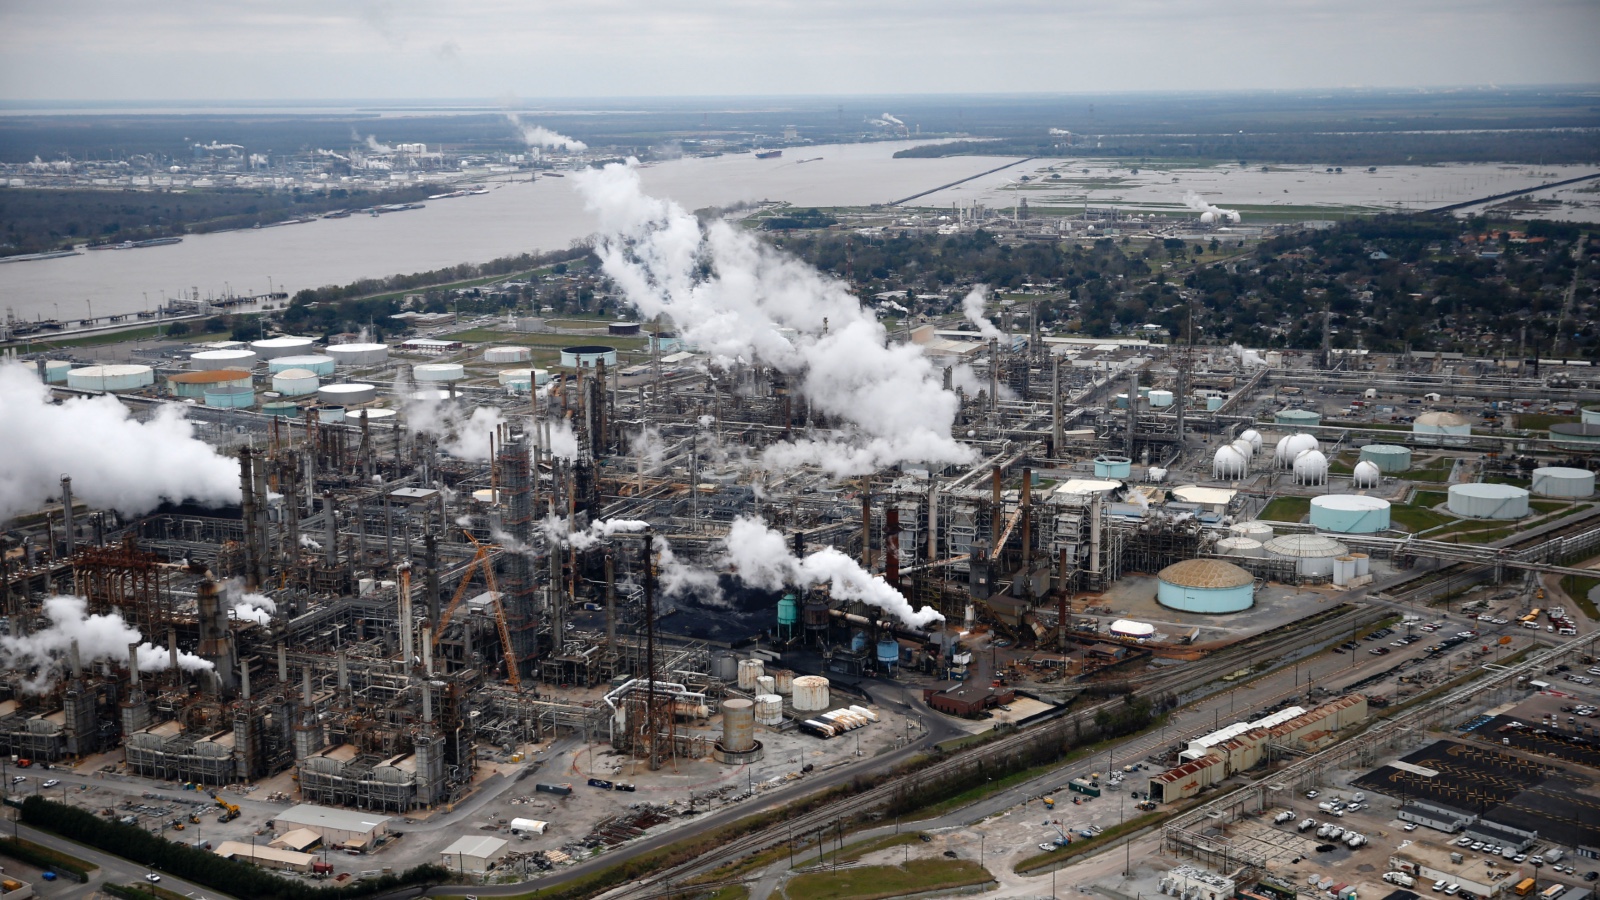 An aerial shot of a Shell oil refinery in Louisiana